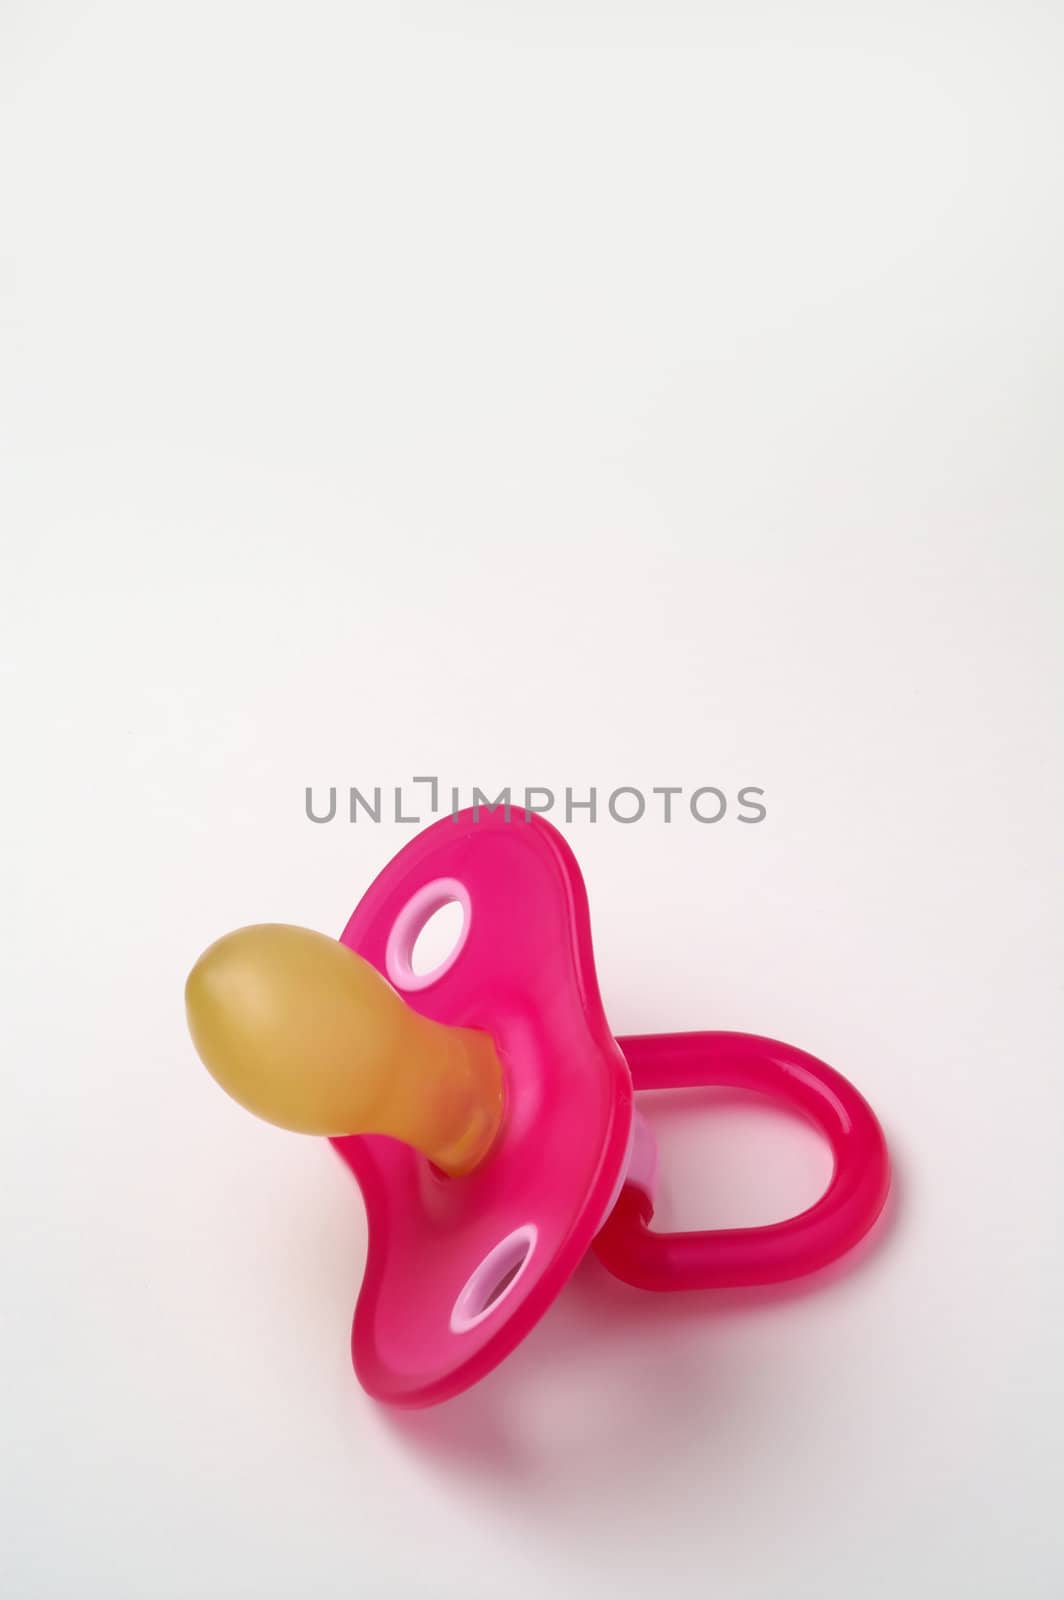 Pacifier - Soother with clipping path by Laborer